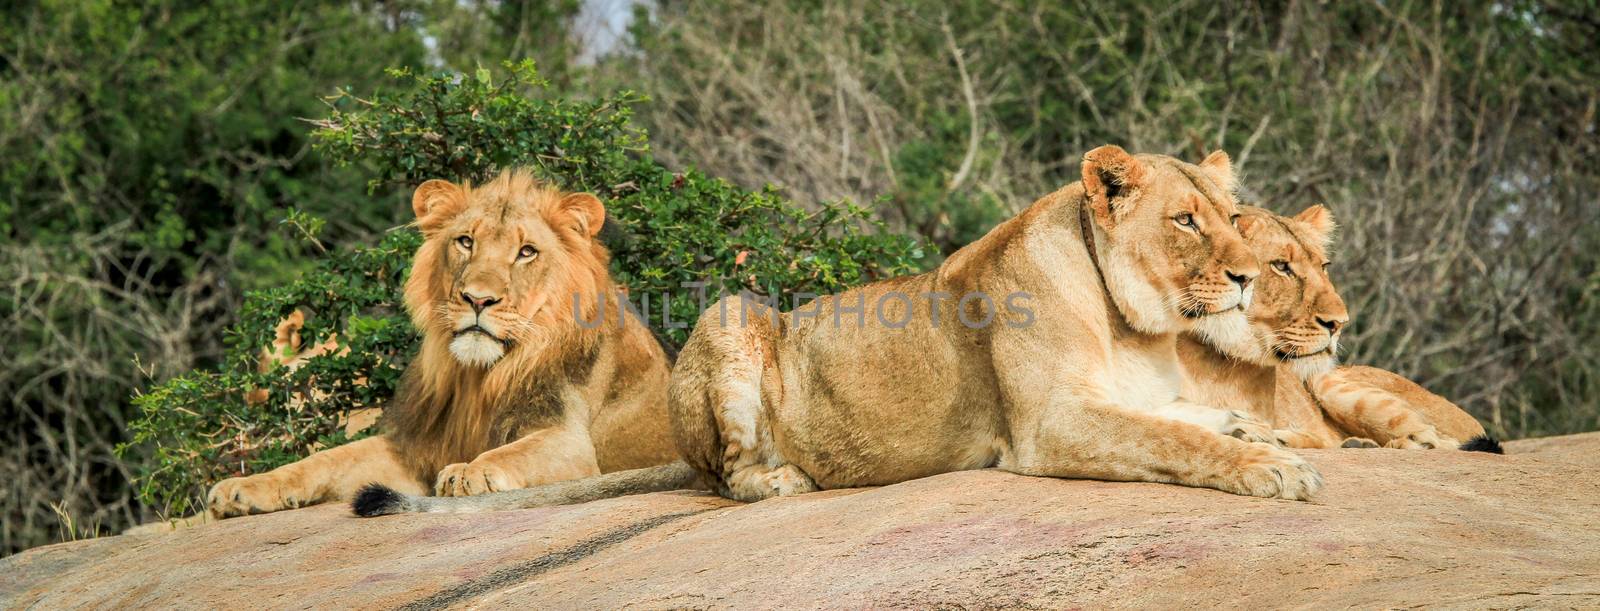 Lions on the rocks in the Selati Game Reserve by Simoneemanphotography